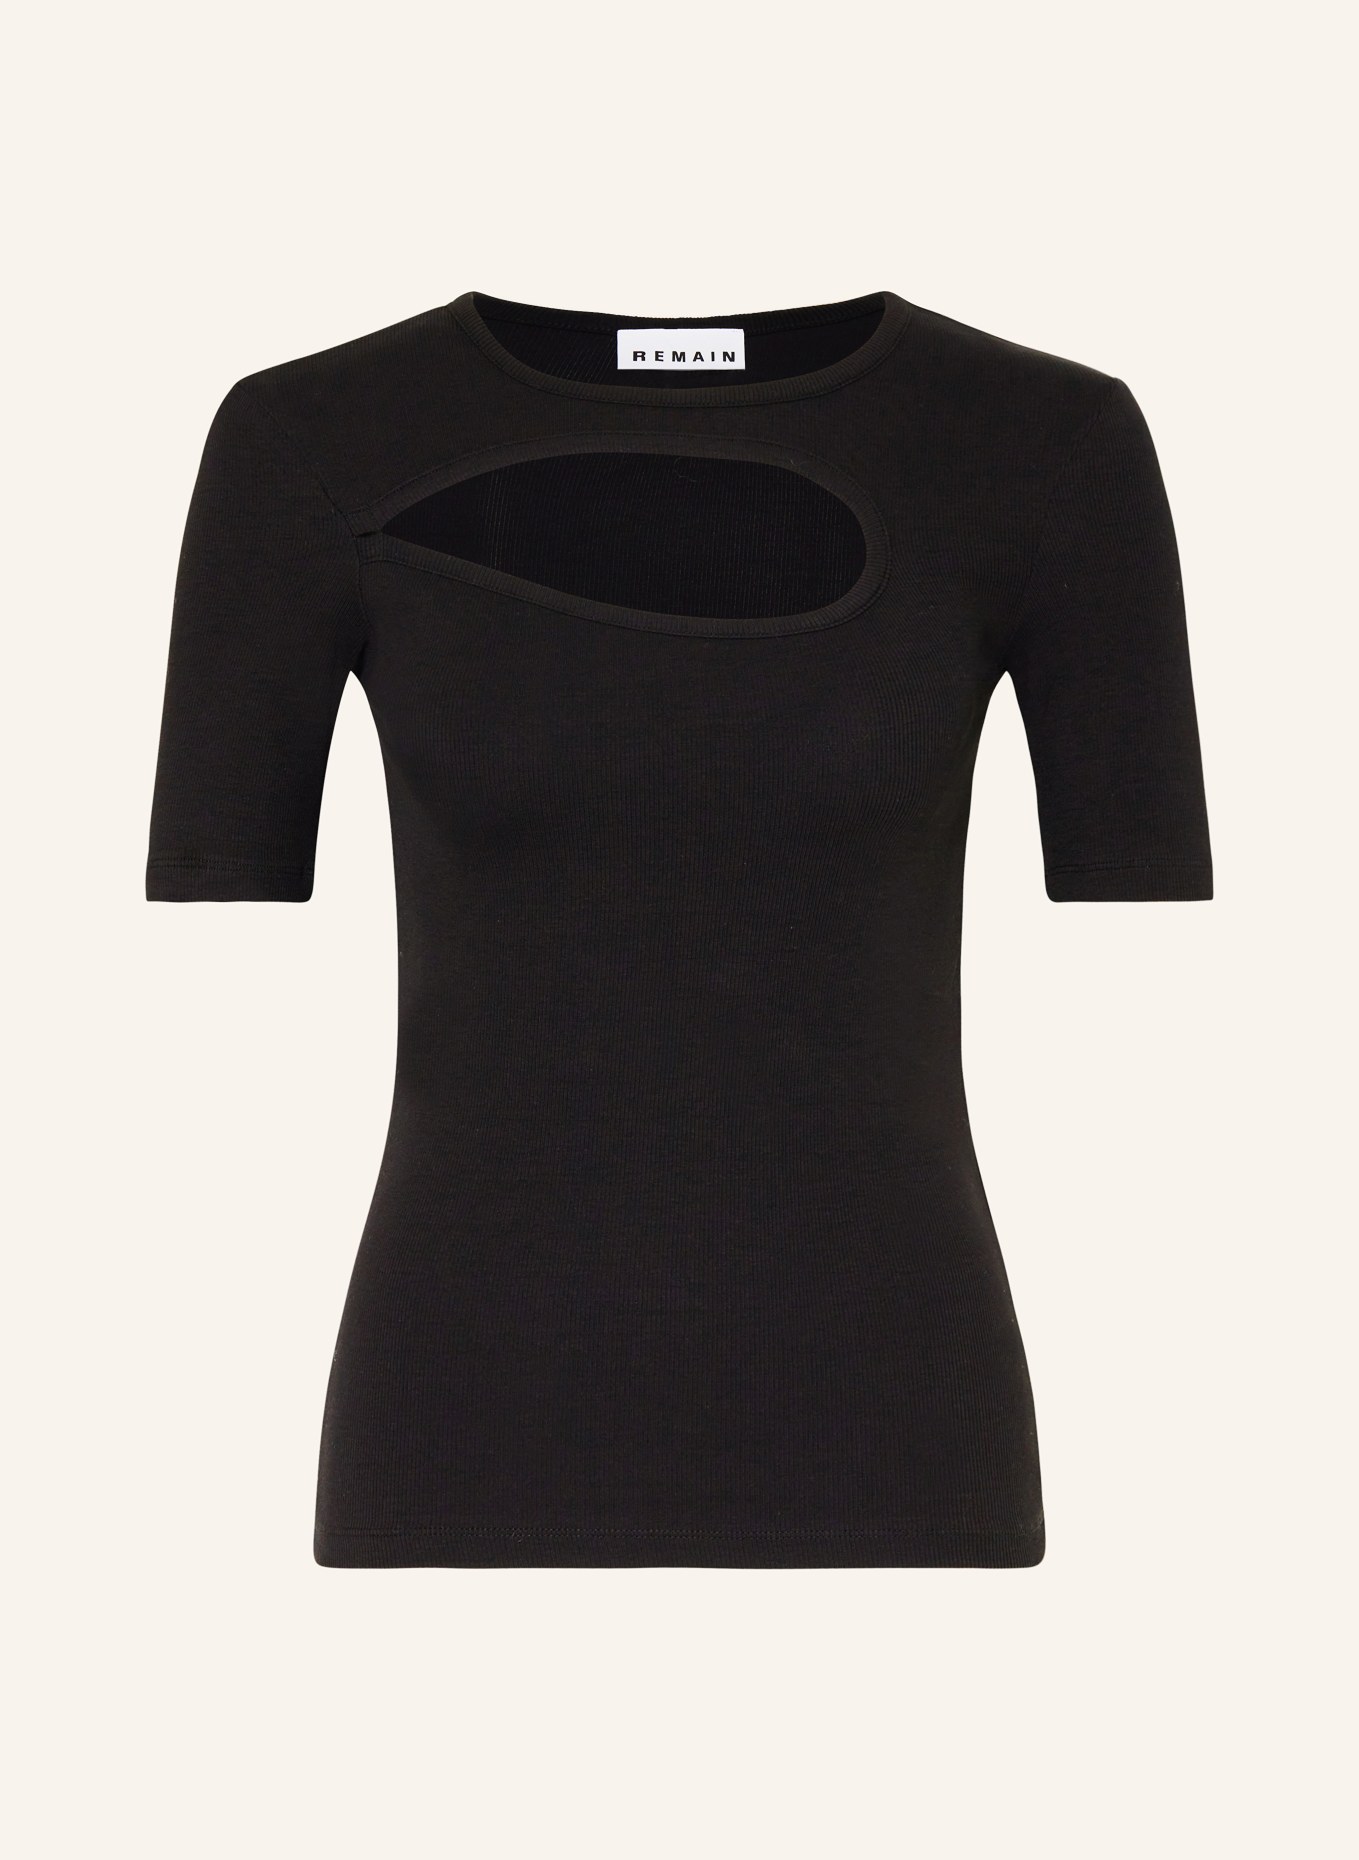 REMAIN T-shirt with cut-out, Color: BLACK (Image 1)